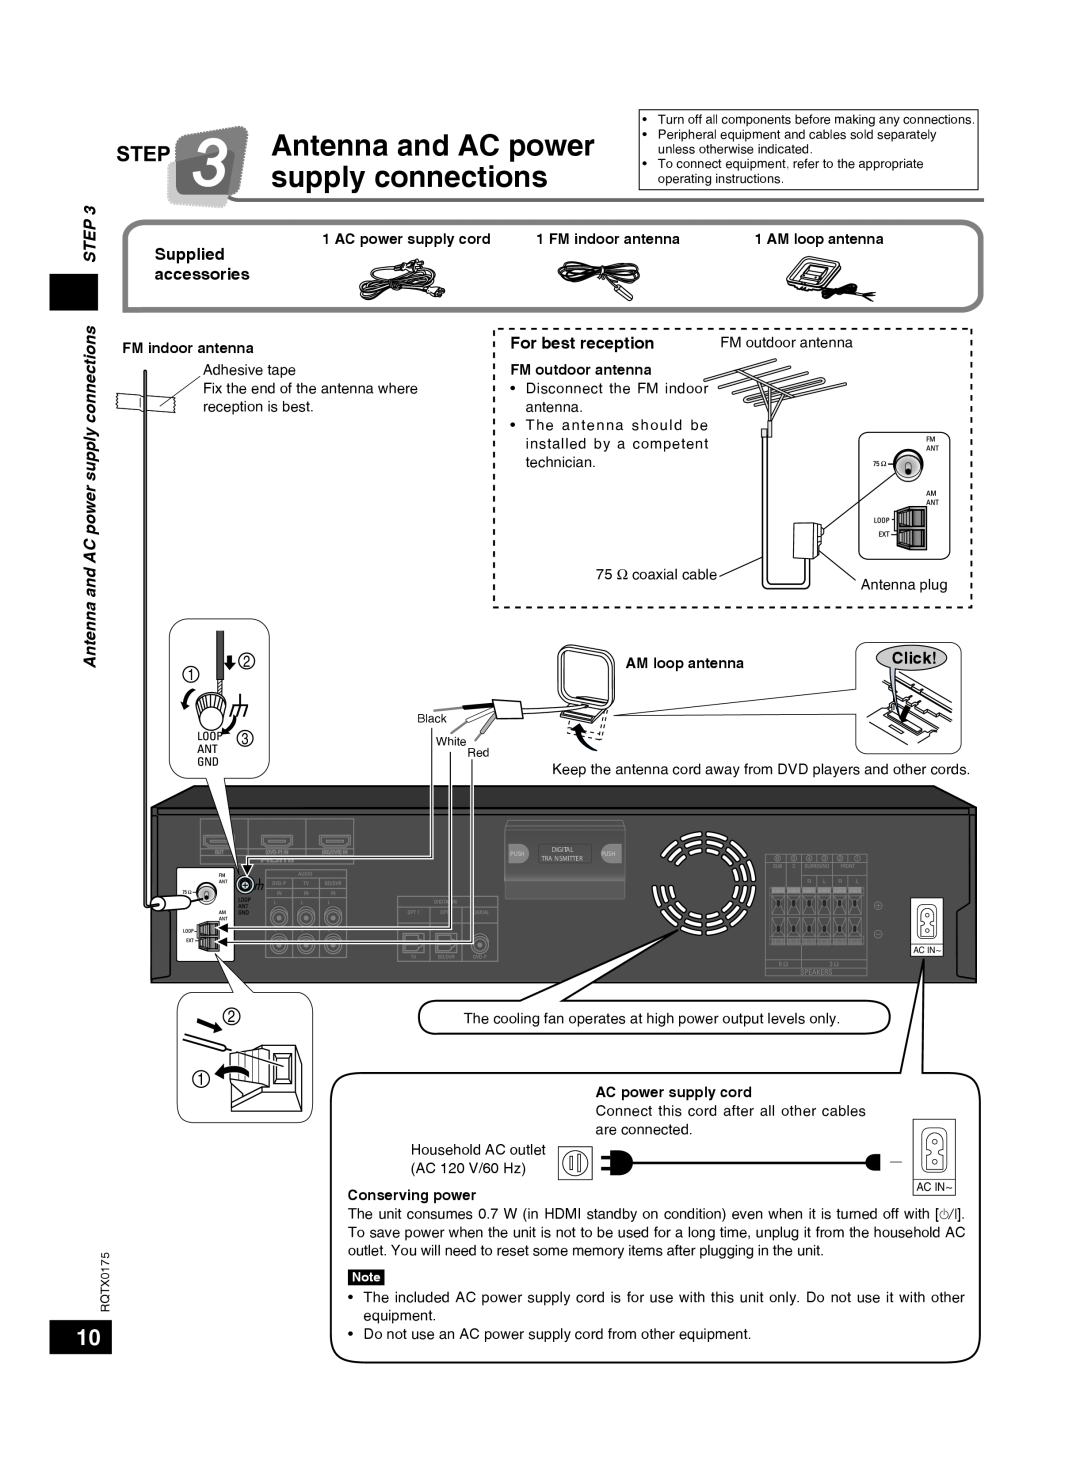 Panasonic SCHT56 operating instructions Antenna and AC power, Step, AC power supply connections 